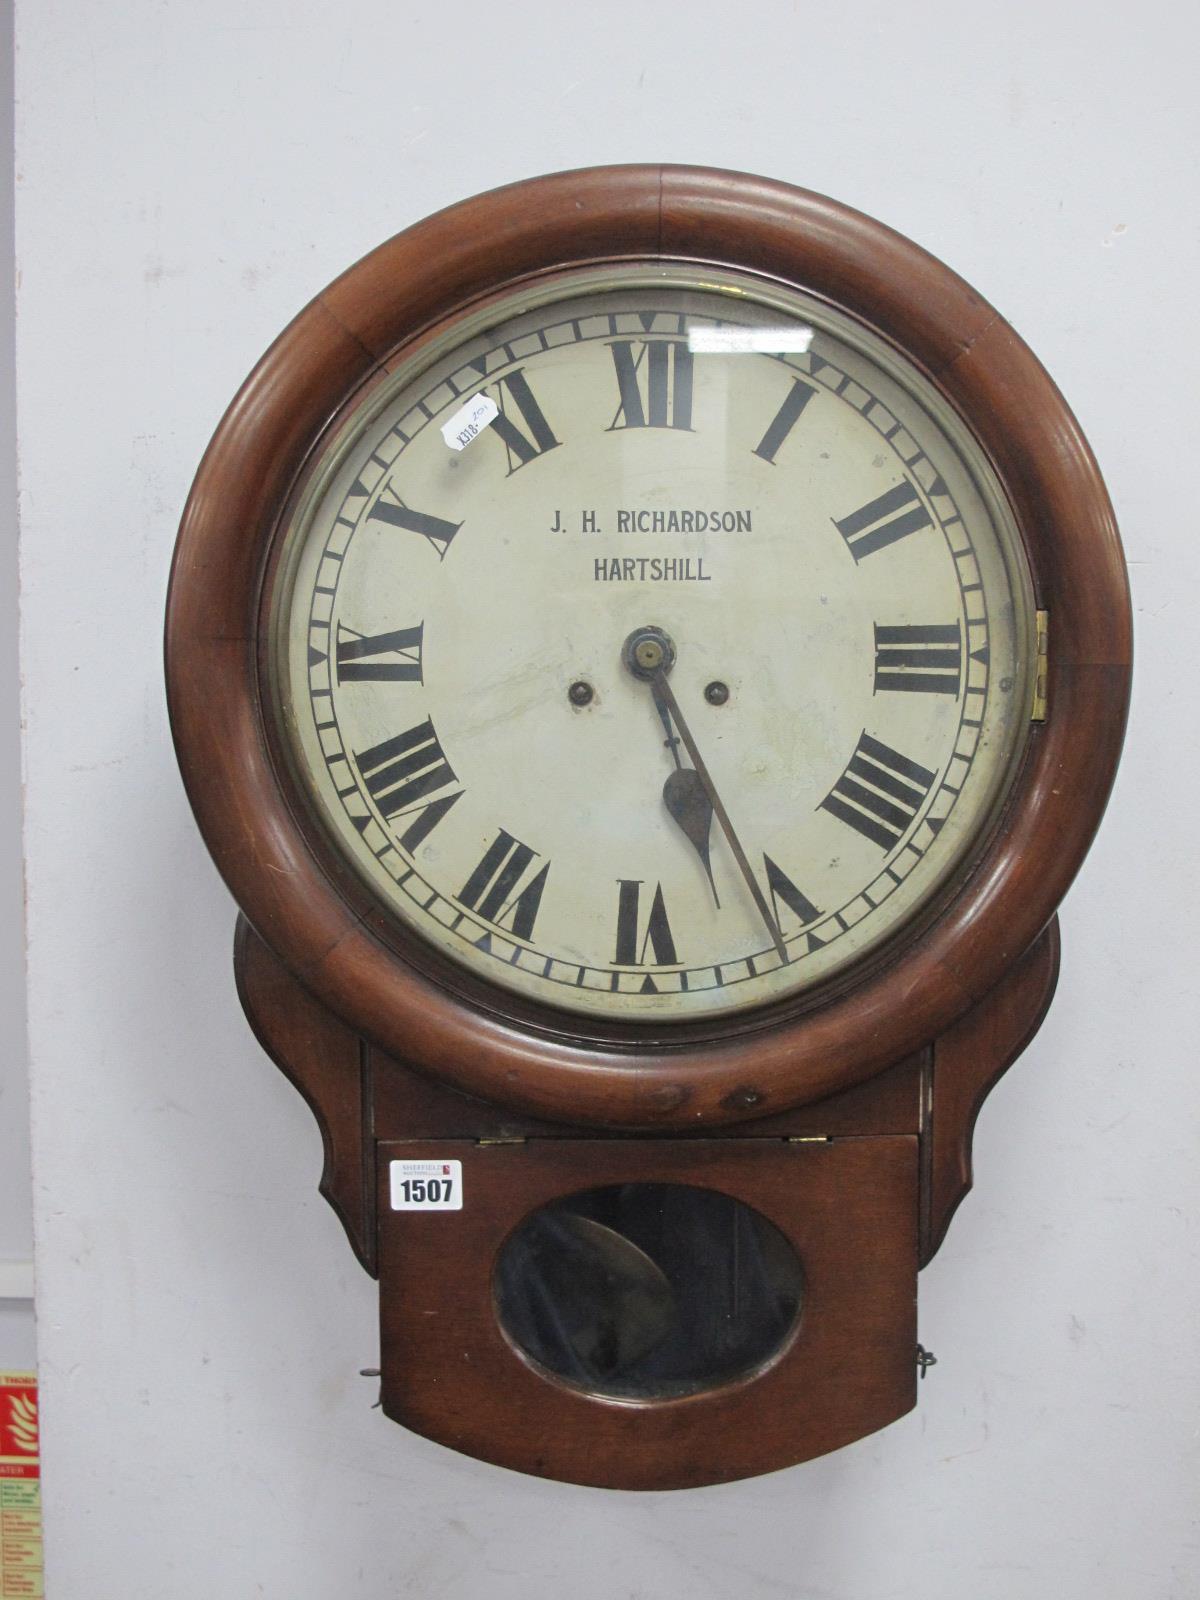 An Early XX Century Mahogany Wall Clock, by J.H. Richardson, Hartshill, with white dial and Roman